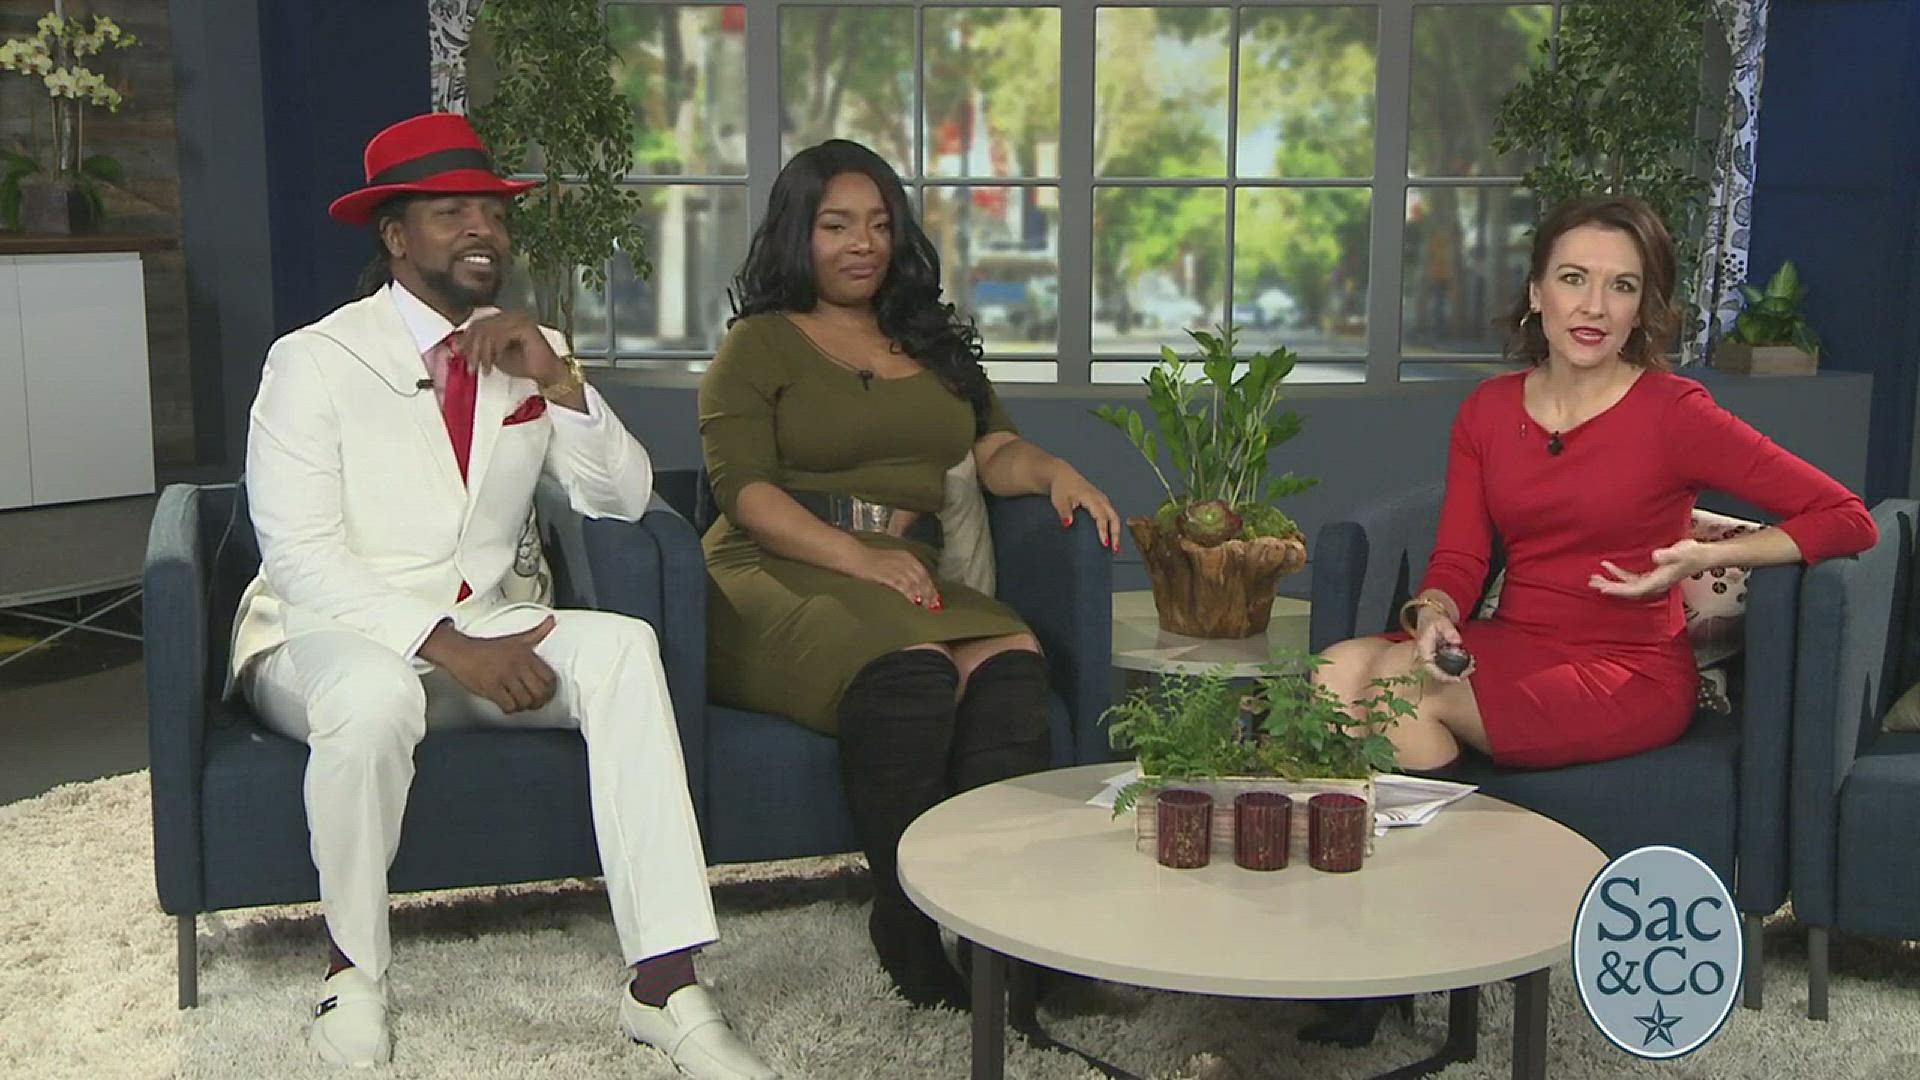 We're chatting with singers Will Whitlock and Shadia Powell on why black history month is important to them as artists. And, we get to hear a little from Will singing as well!